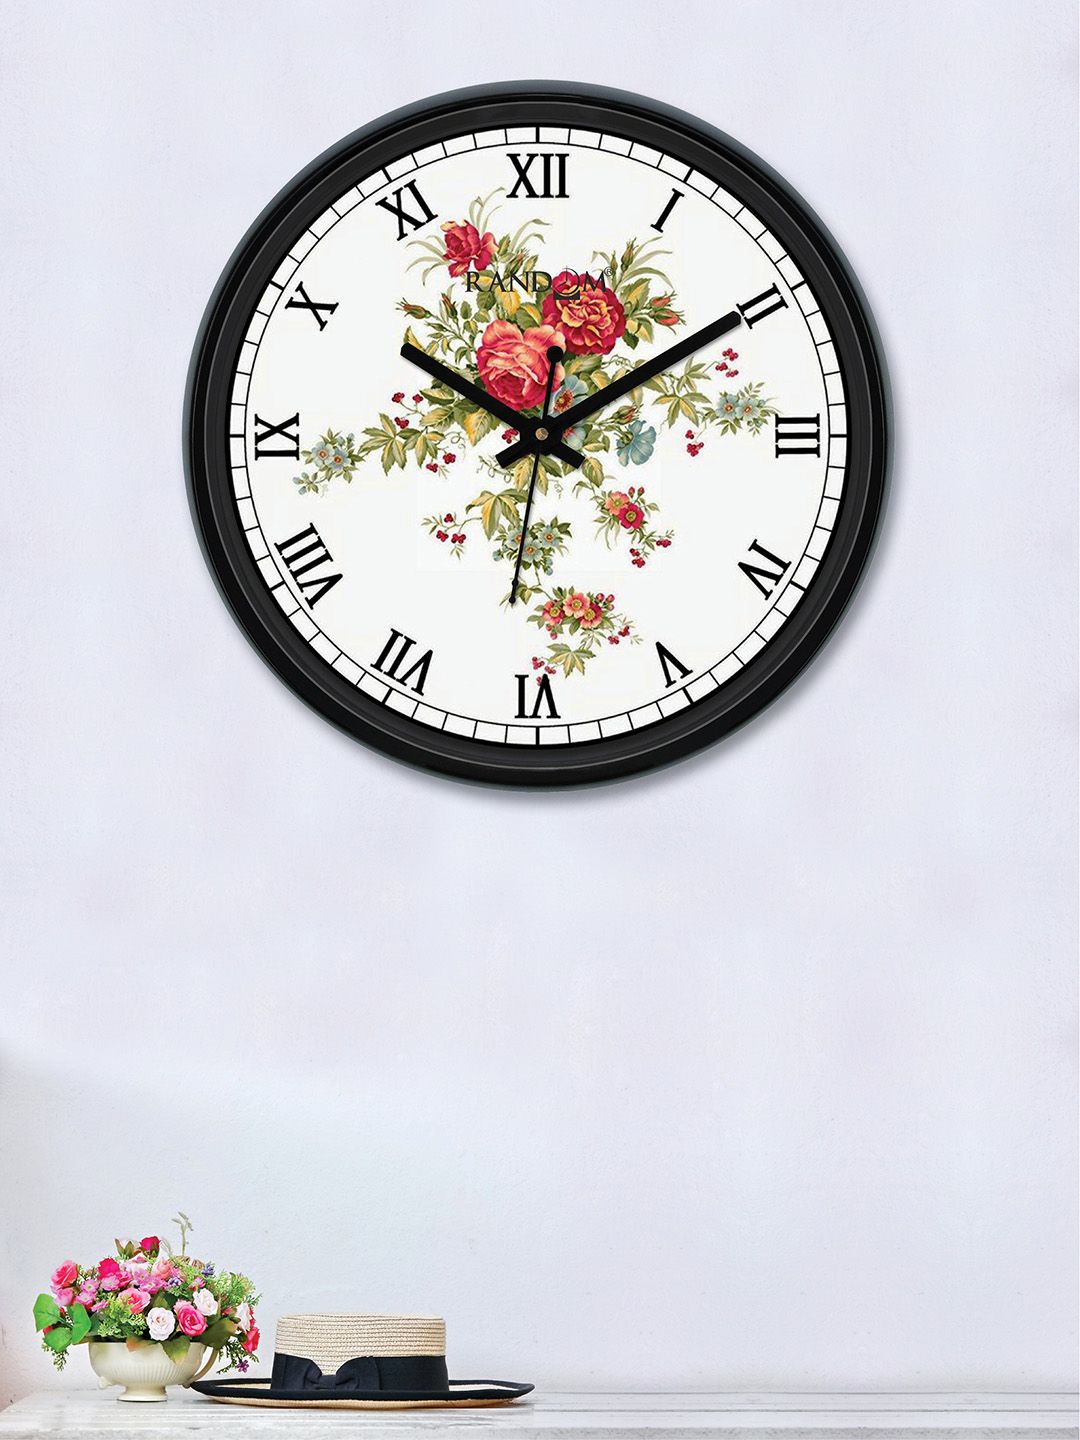 RANDOM Off-White & Red Round Printed 30 cm Analogue Wall Clock Price in India